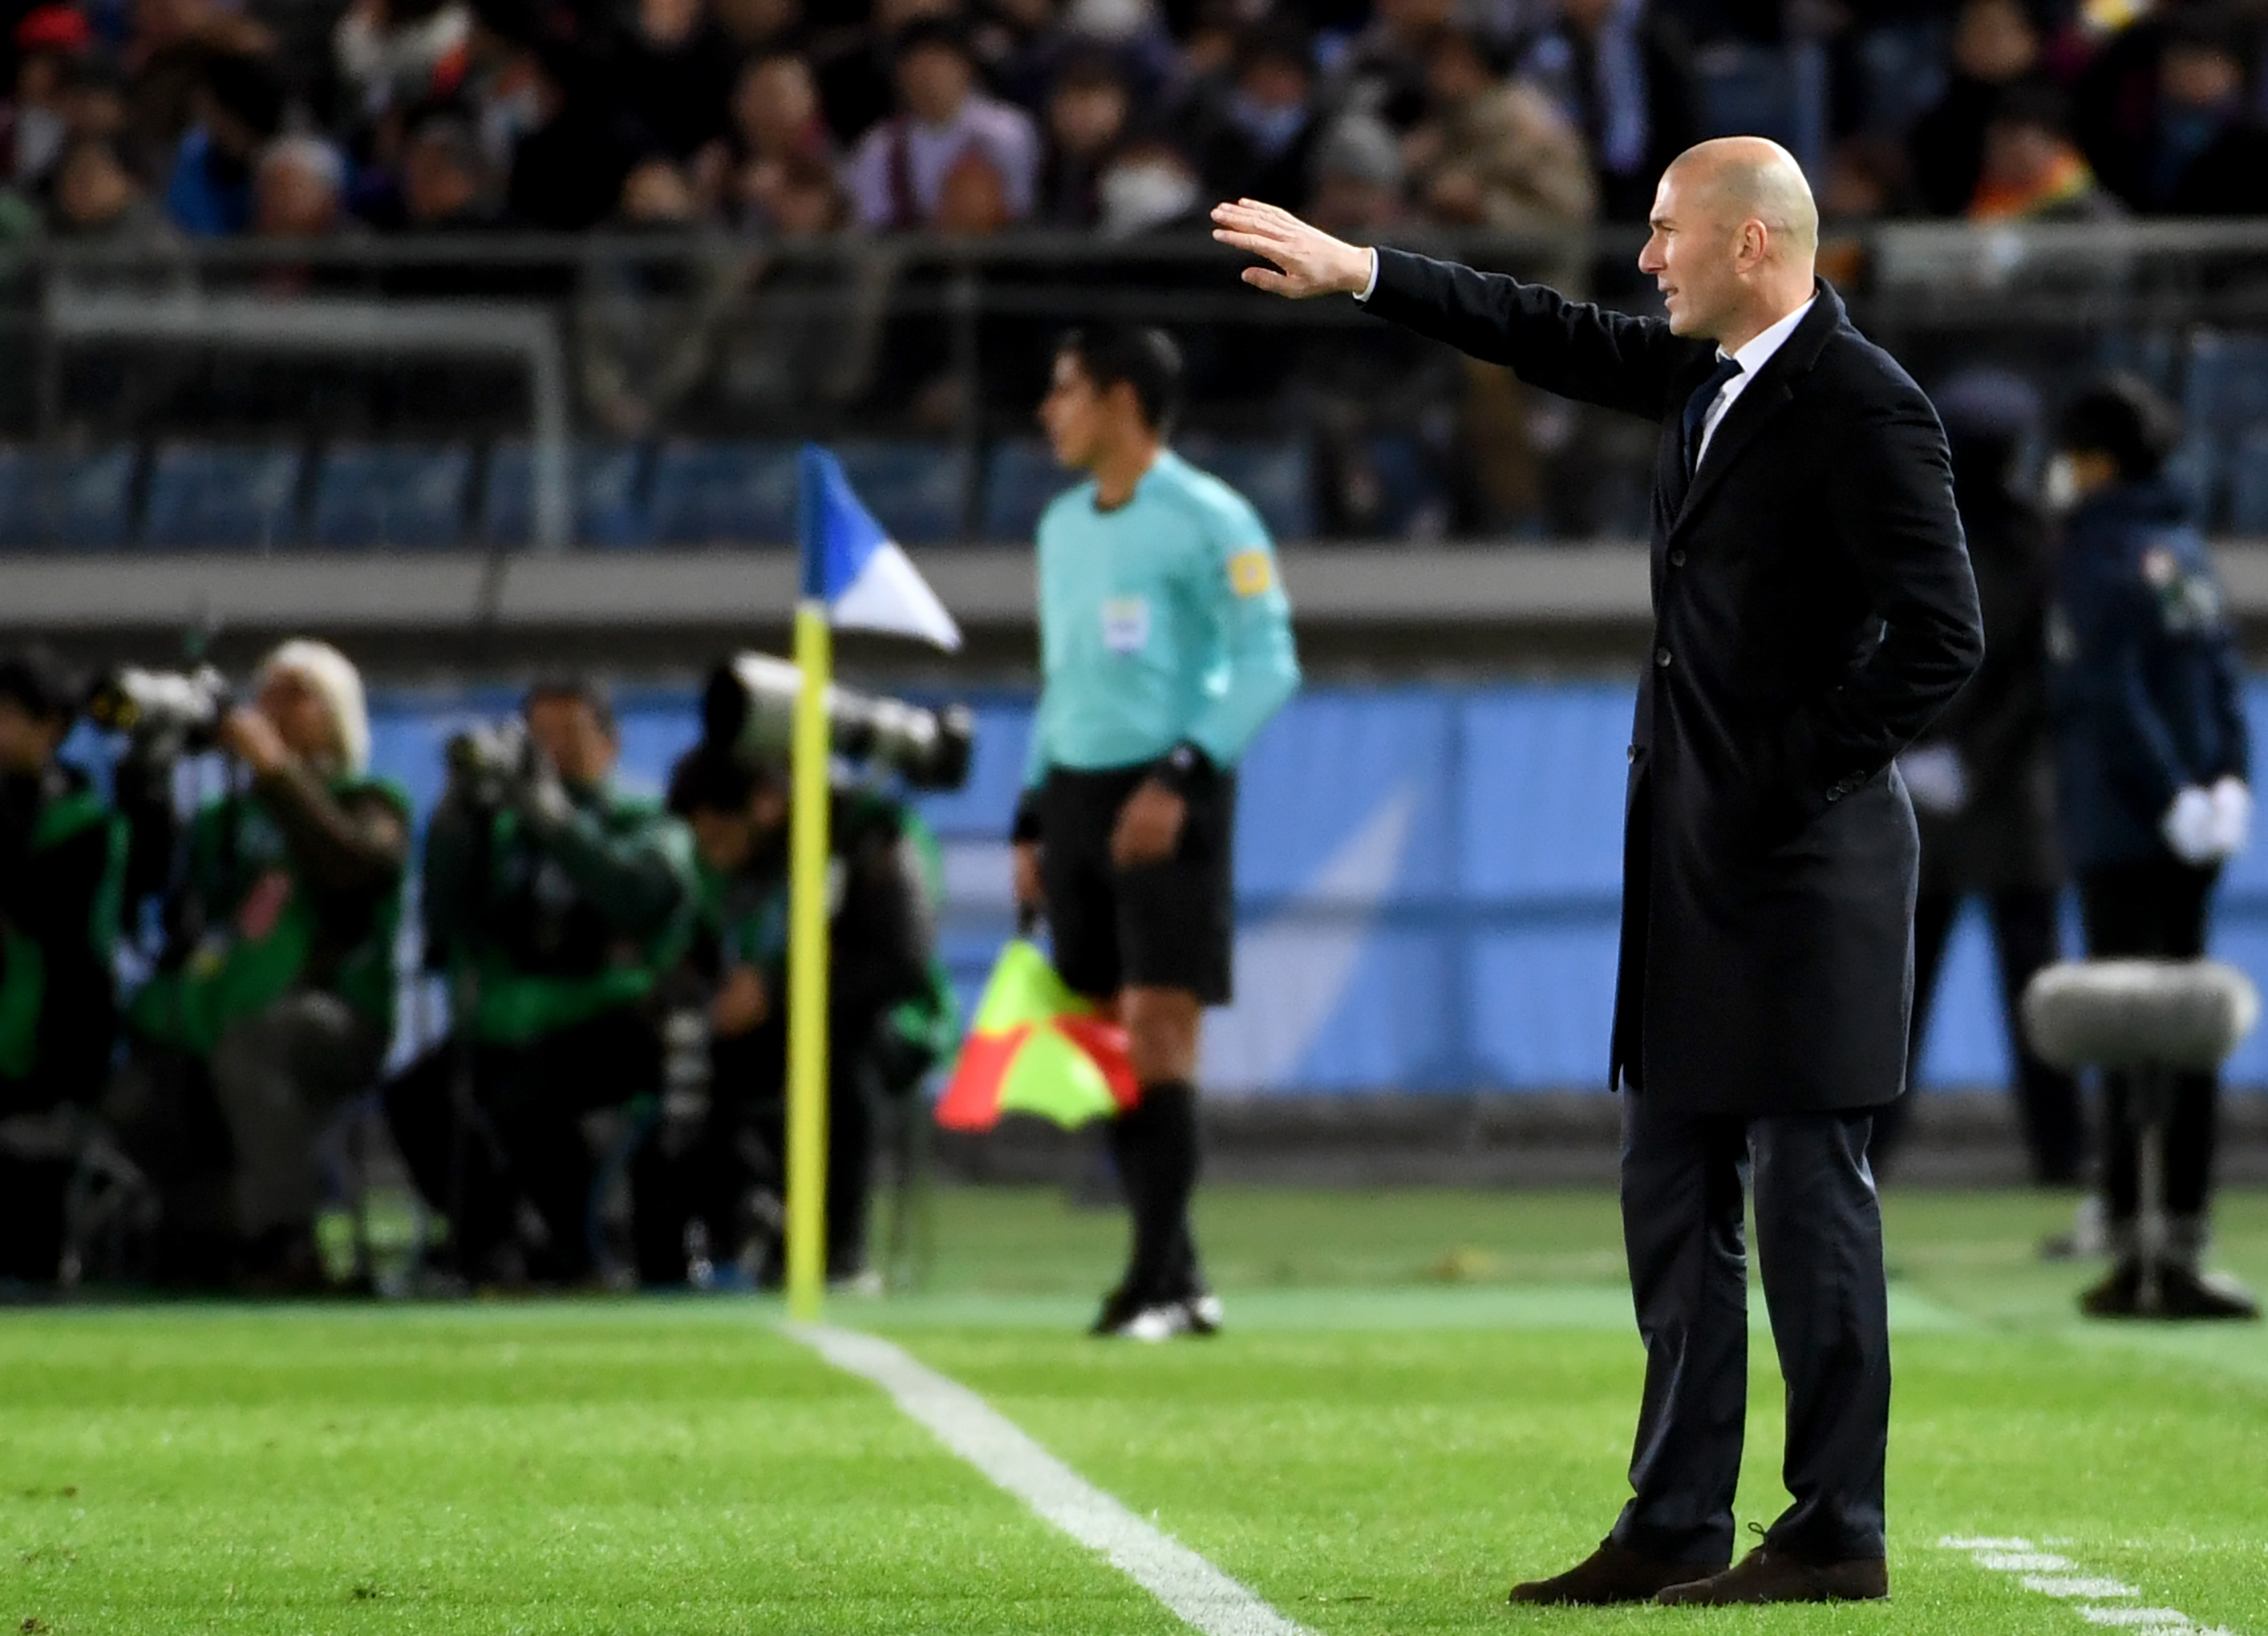 Real Madrid's head coach Zinedine Zidane (R) watches the game during the Club World Cup semi-final football match between Club America of Mexico and Real Madrid of Spain at Yokohama International stadium in Yokohama on December 15, 2016. / AFP / TOSHIFUMI KITAMURA        (Photo credit should read TOSHIFUMI KITAMURA/AFP/Getty Images)